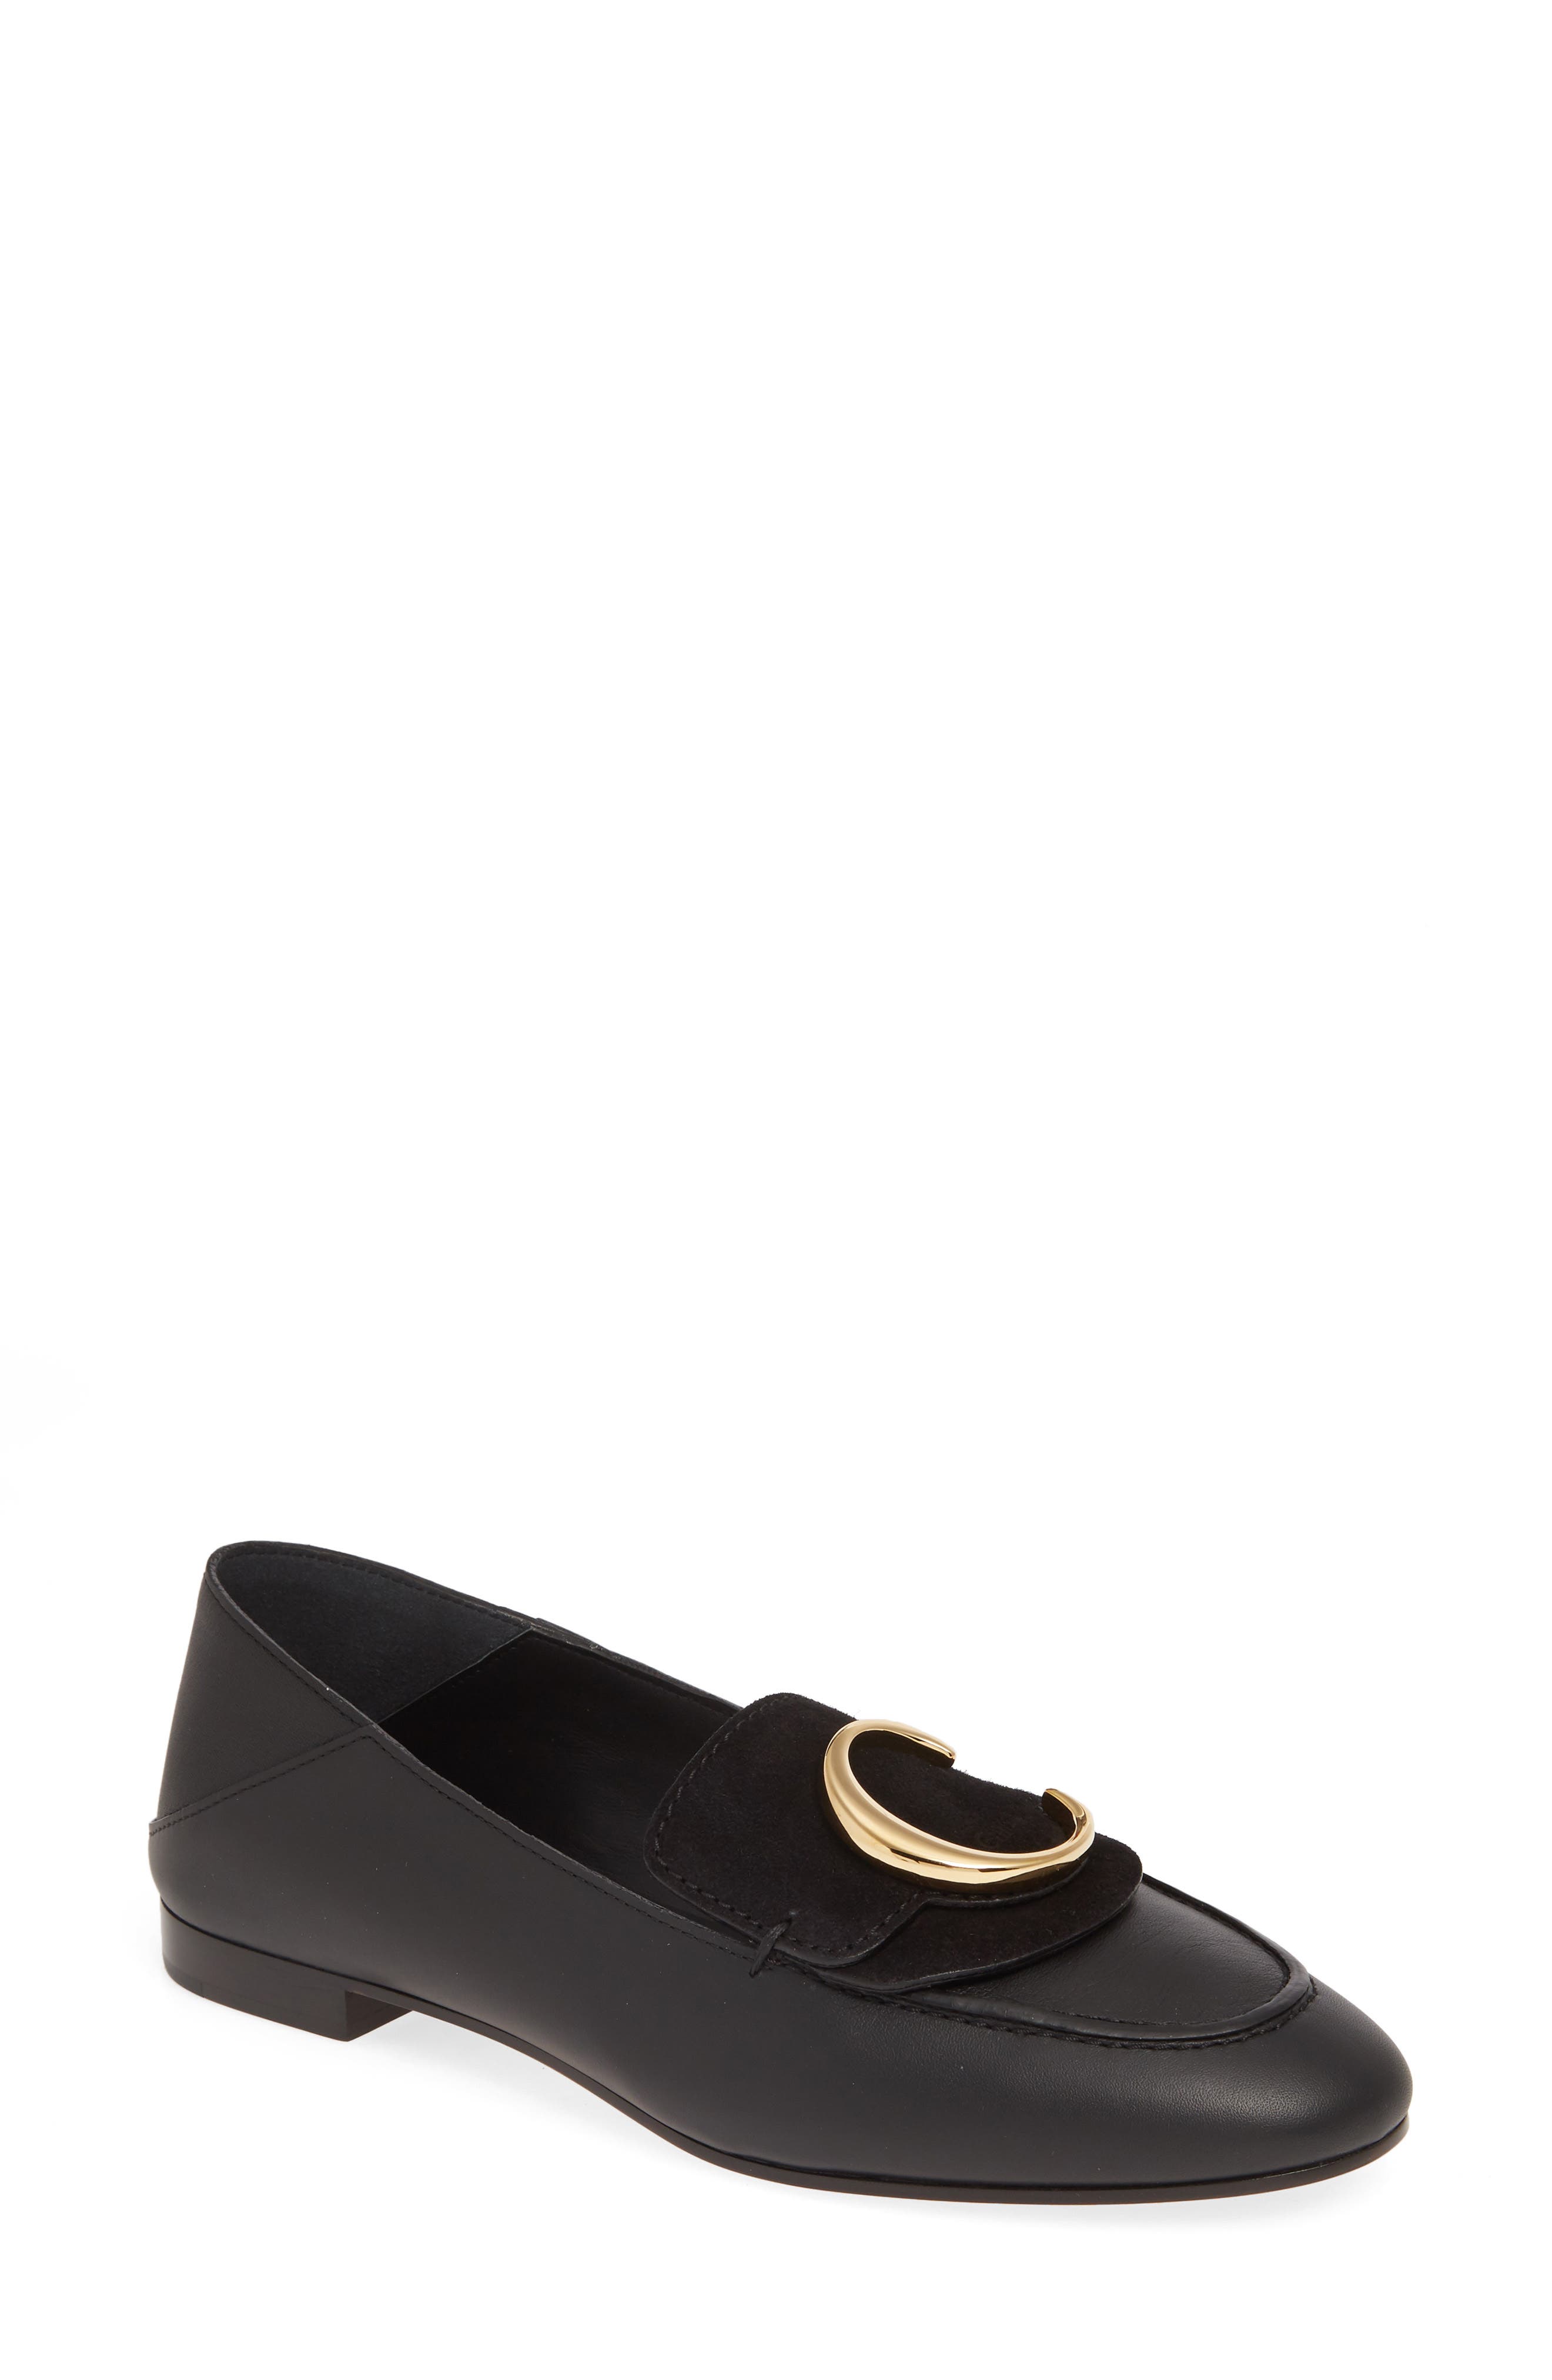 chloe story convertible loafer